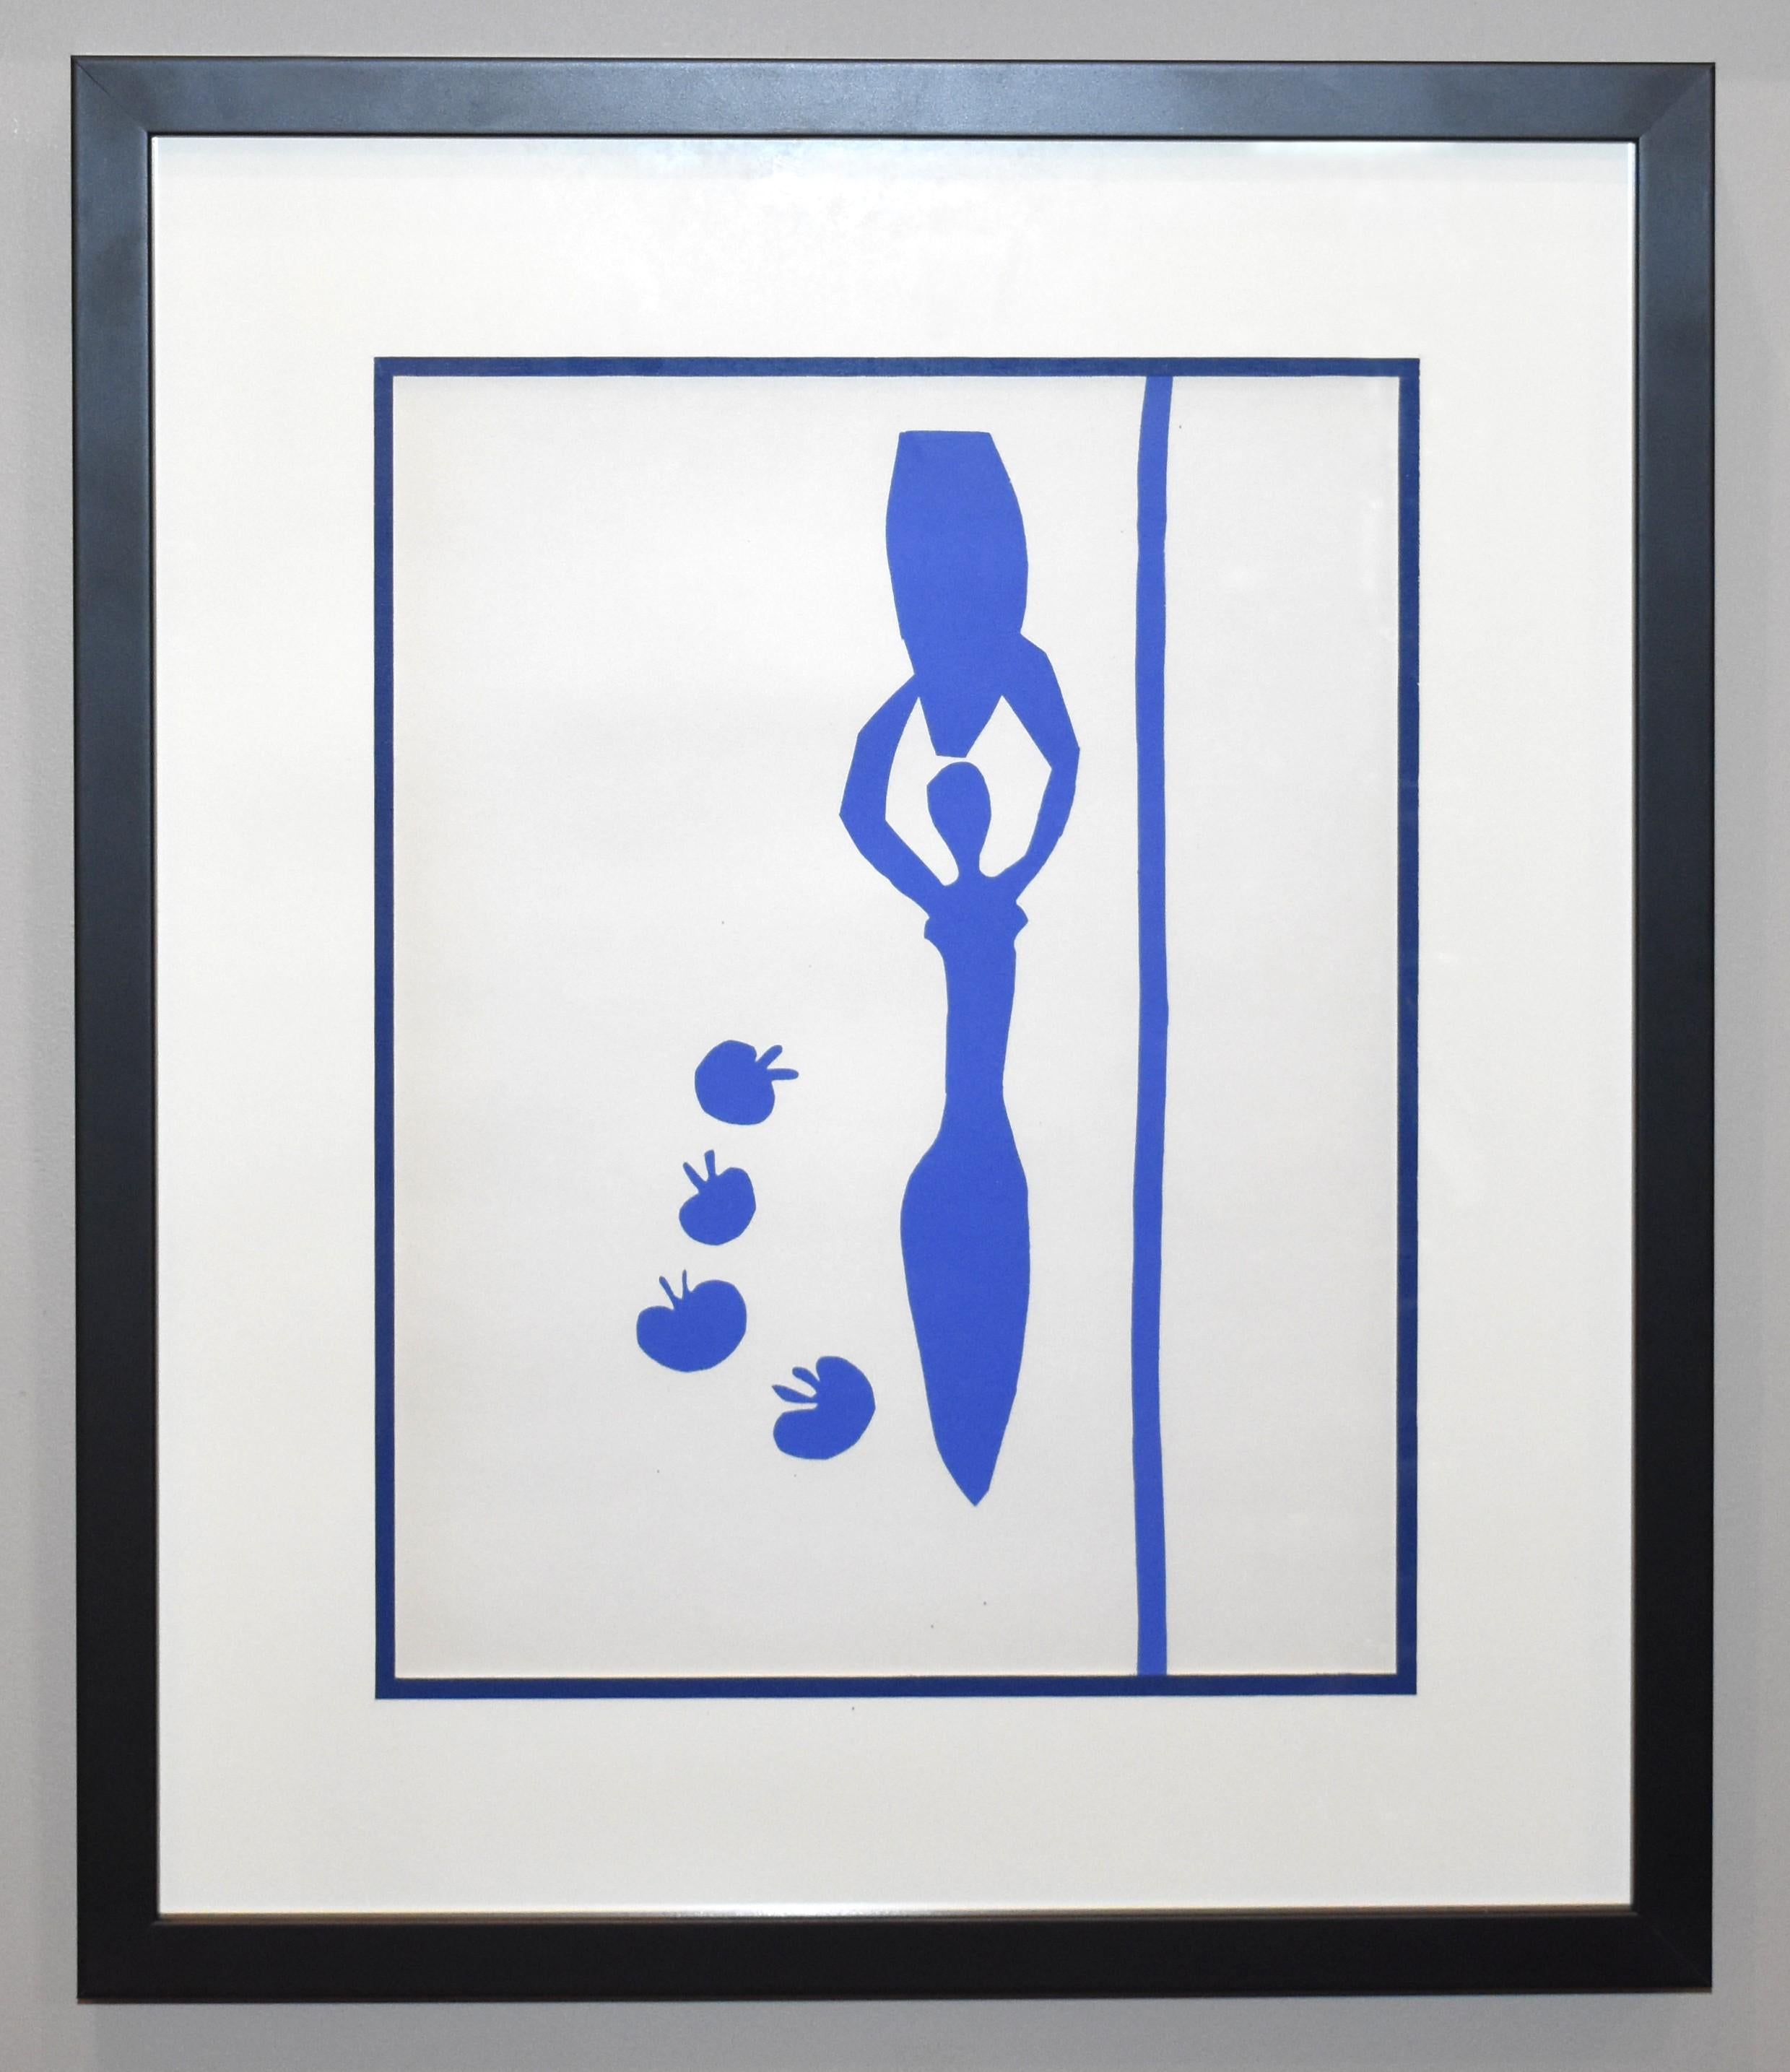 Le Jarre II, from The Last Works of Henri Matisse